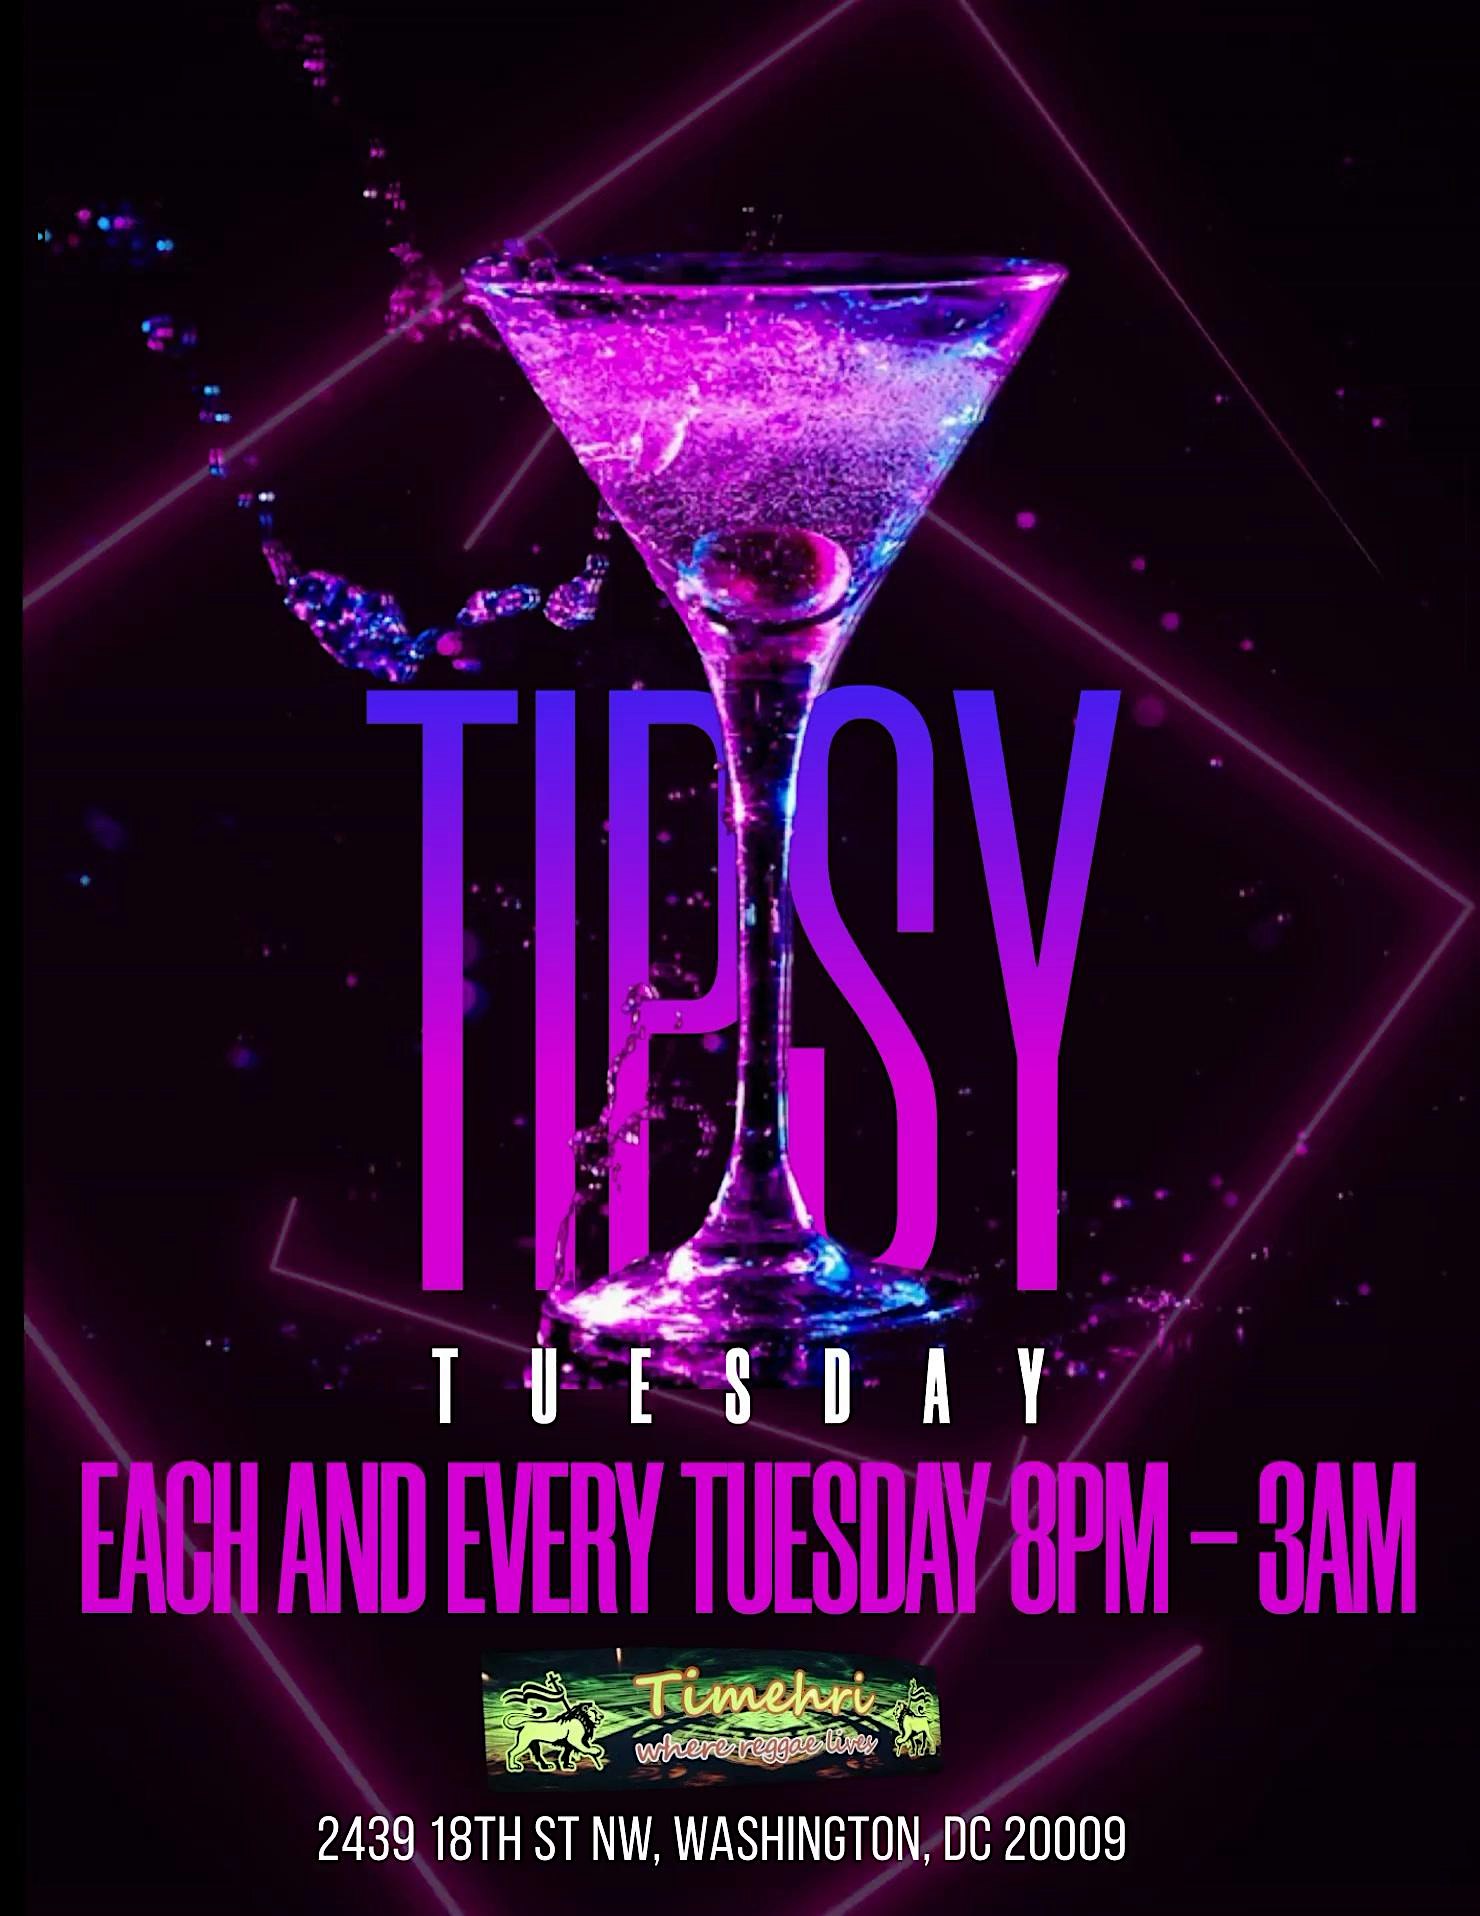 Tuesday Night at Timehri's